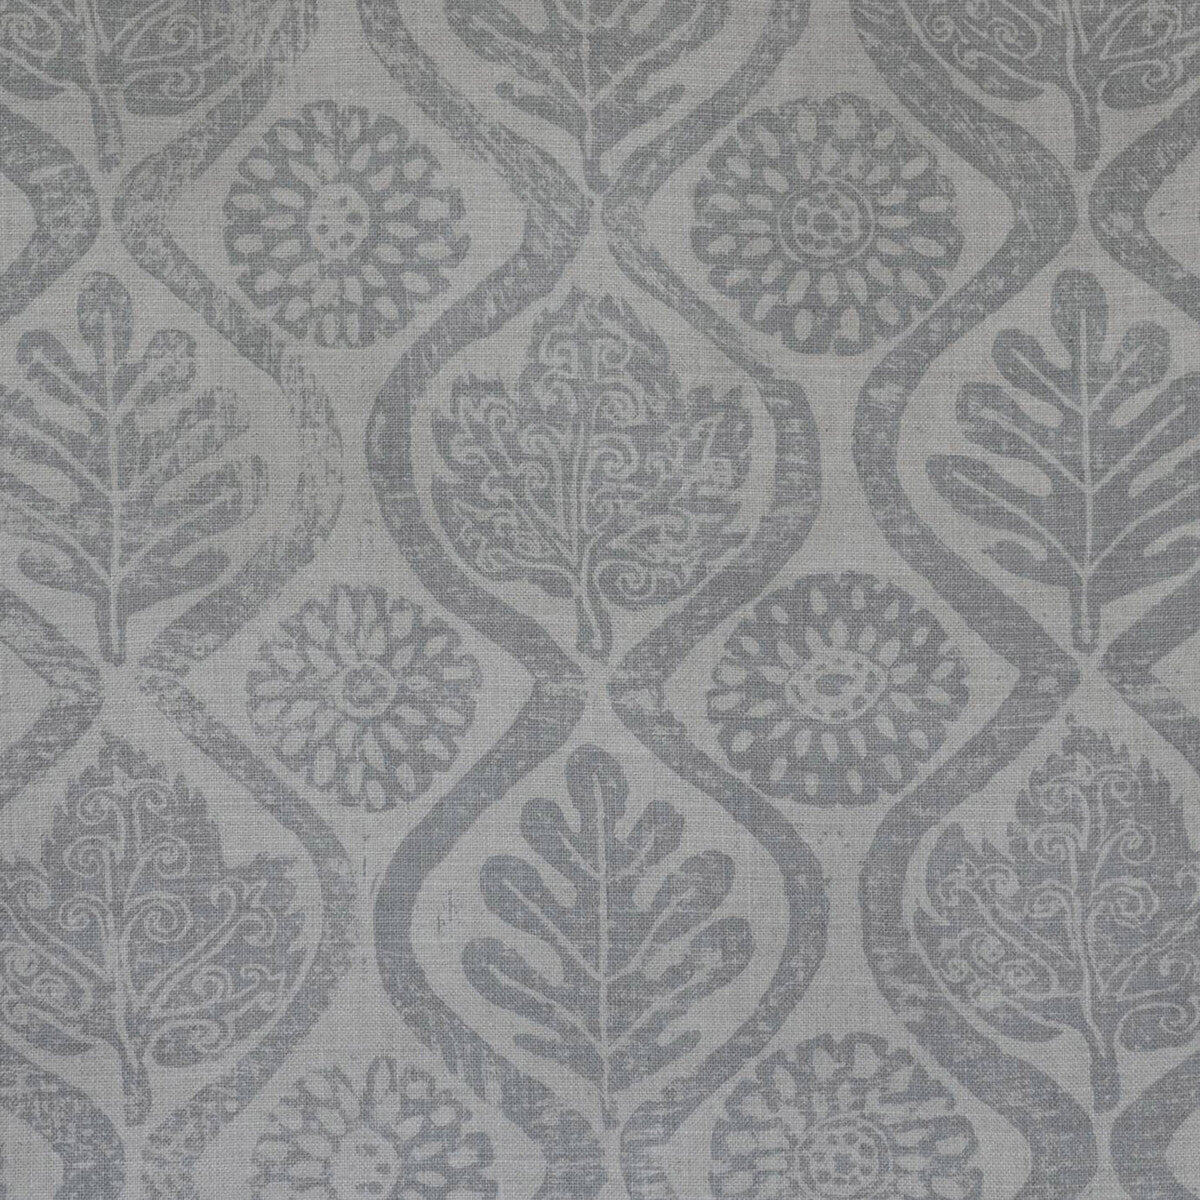 Oakleaves fabric in french grey color - pattern BFC-3514.116.0 - by Lee Jofa in the Blithfield collection